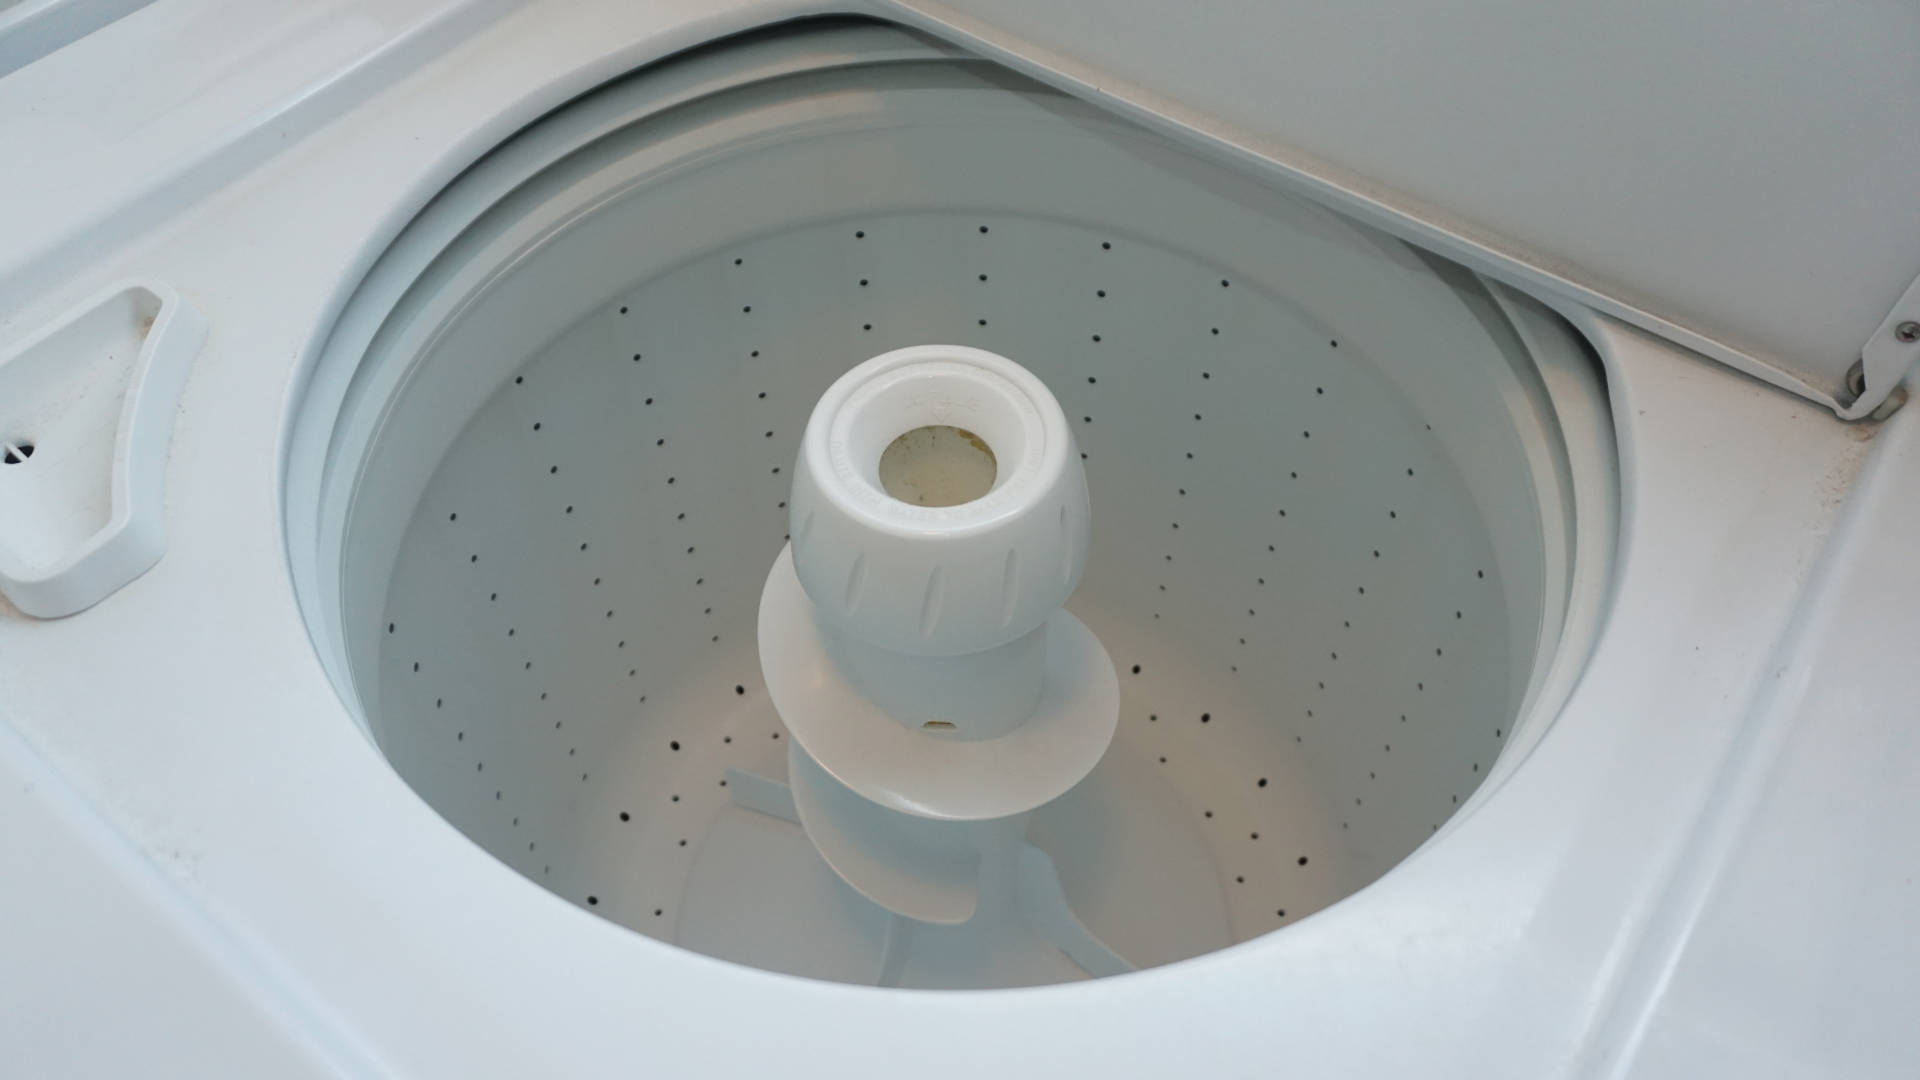 Why is my washing machine not getting all my clothes wet?